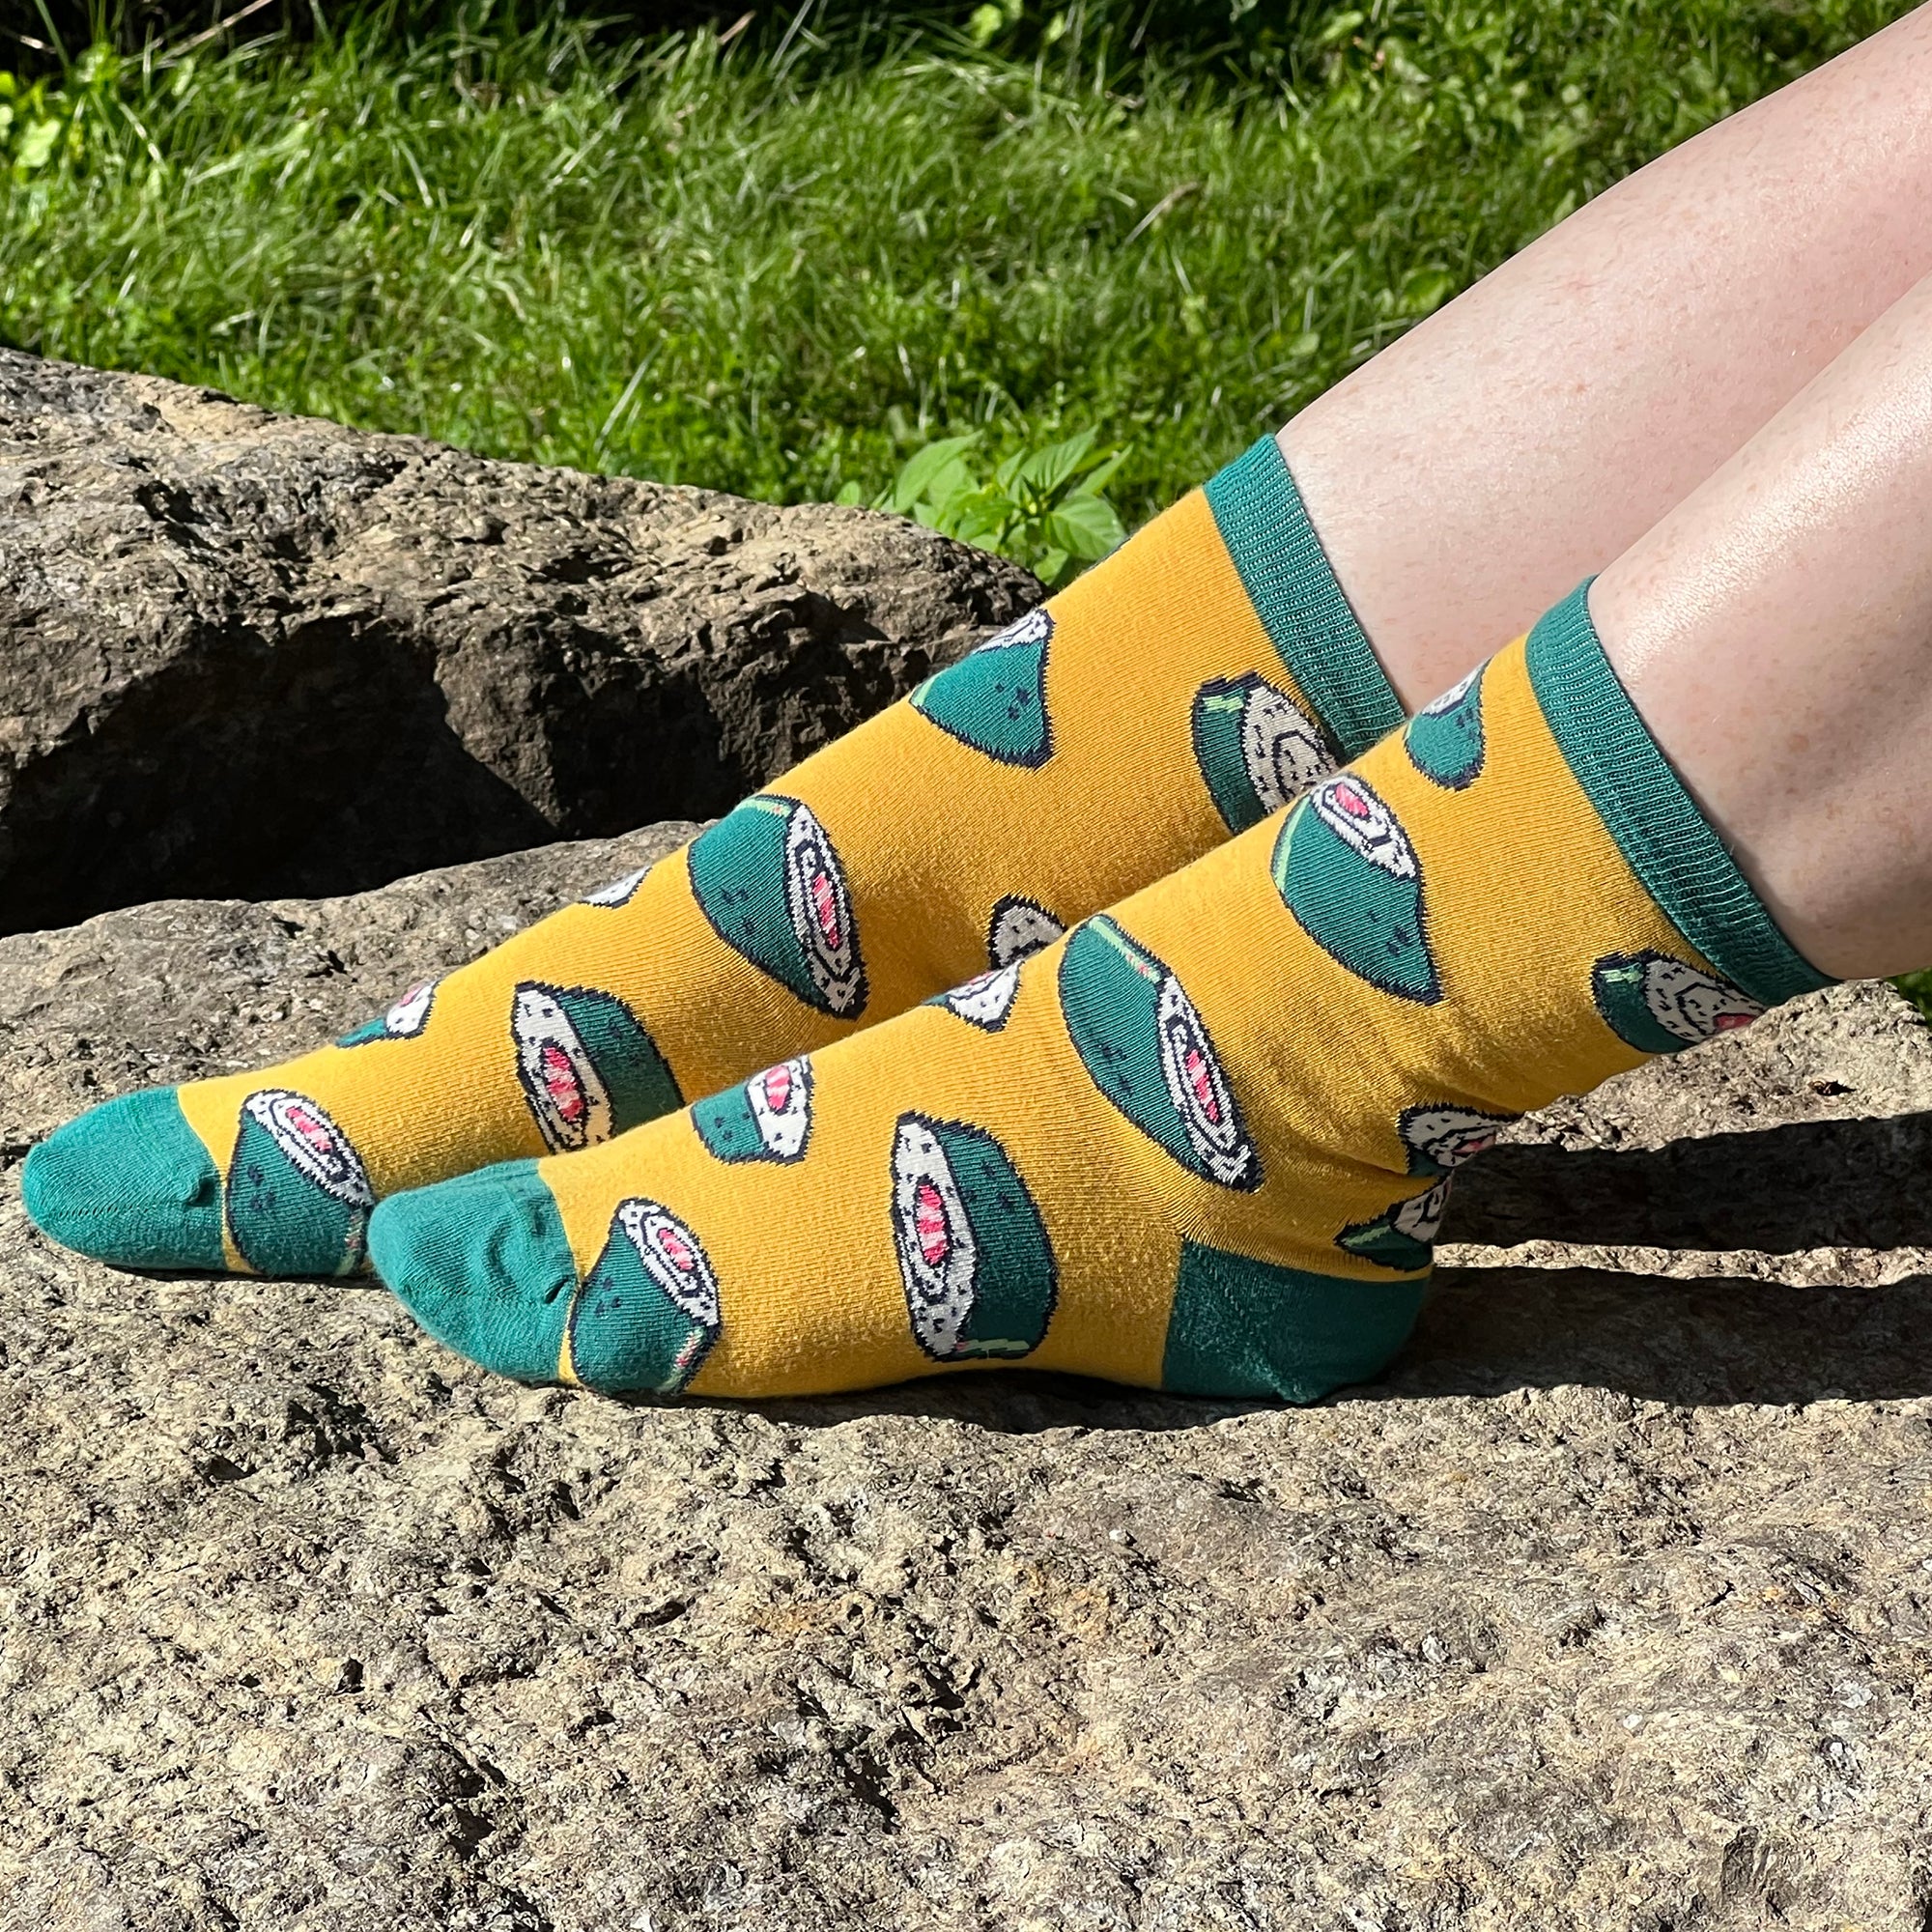 A pair of pale, freckled legs sports a yellow pair of socks patterned with seaweed-wrapped sushi rolls. One foot is outstretched on a rock while the other foot rests on top of that leg, all in front of a grassy background.